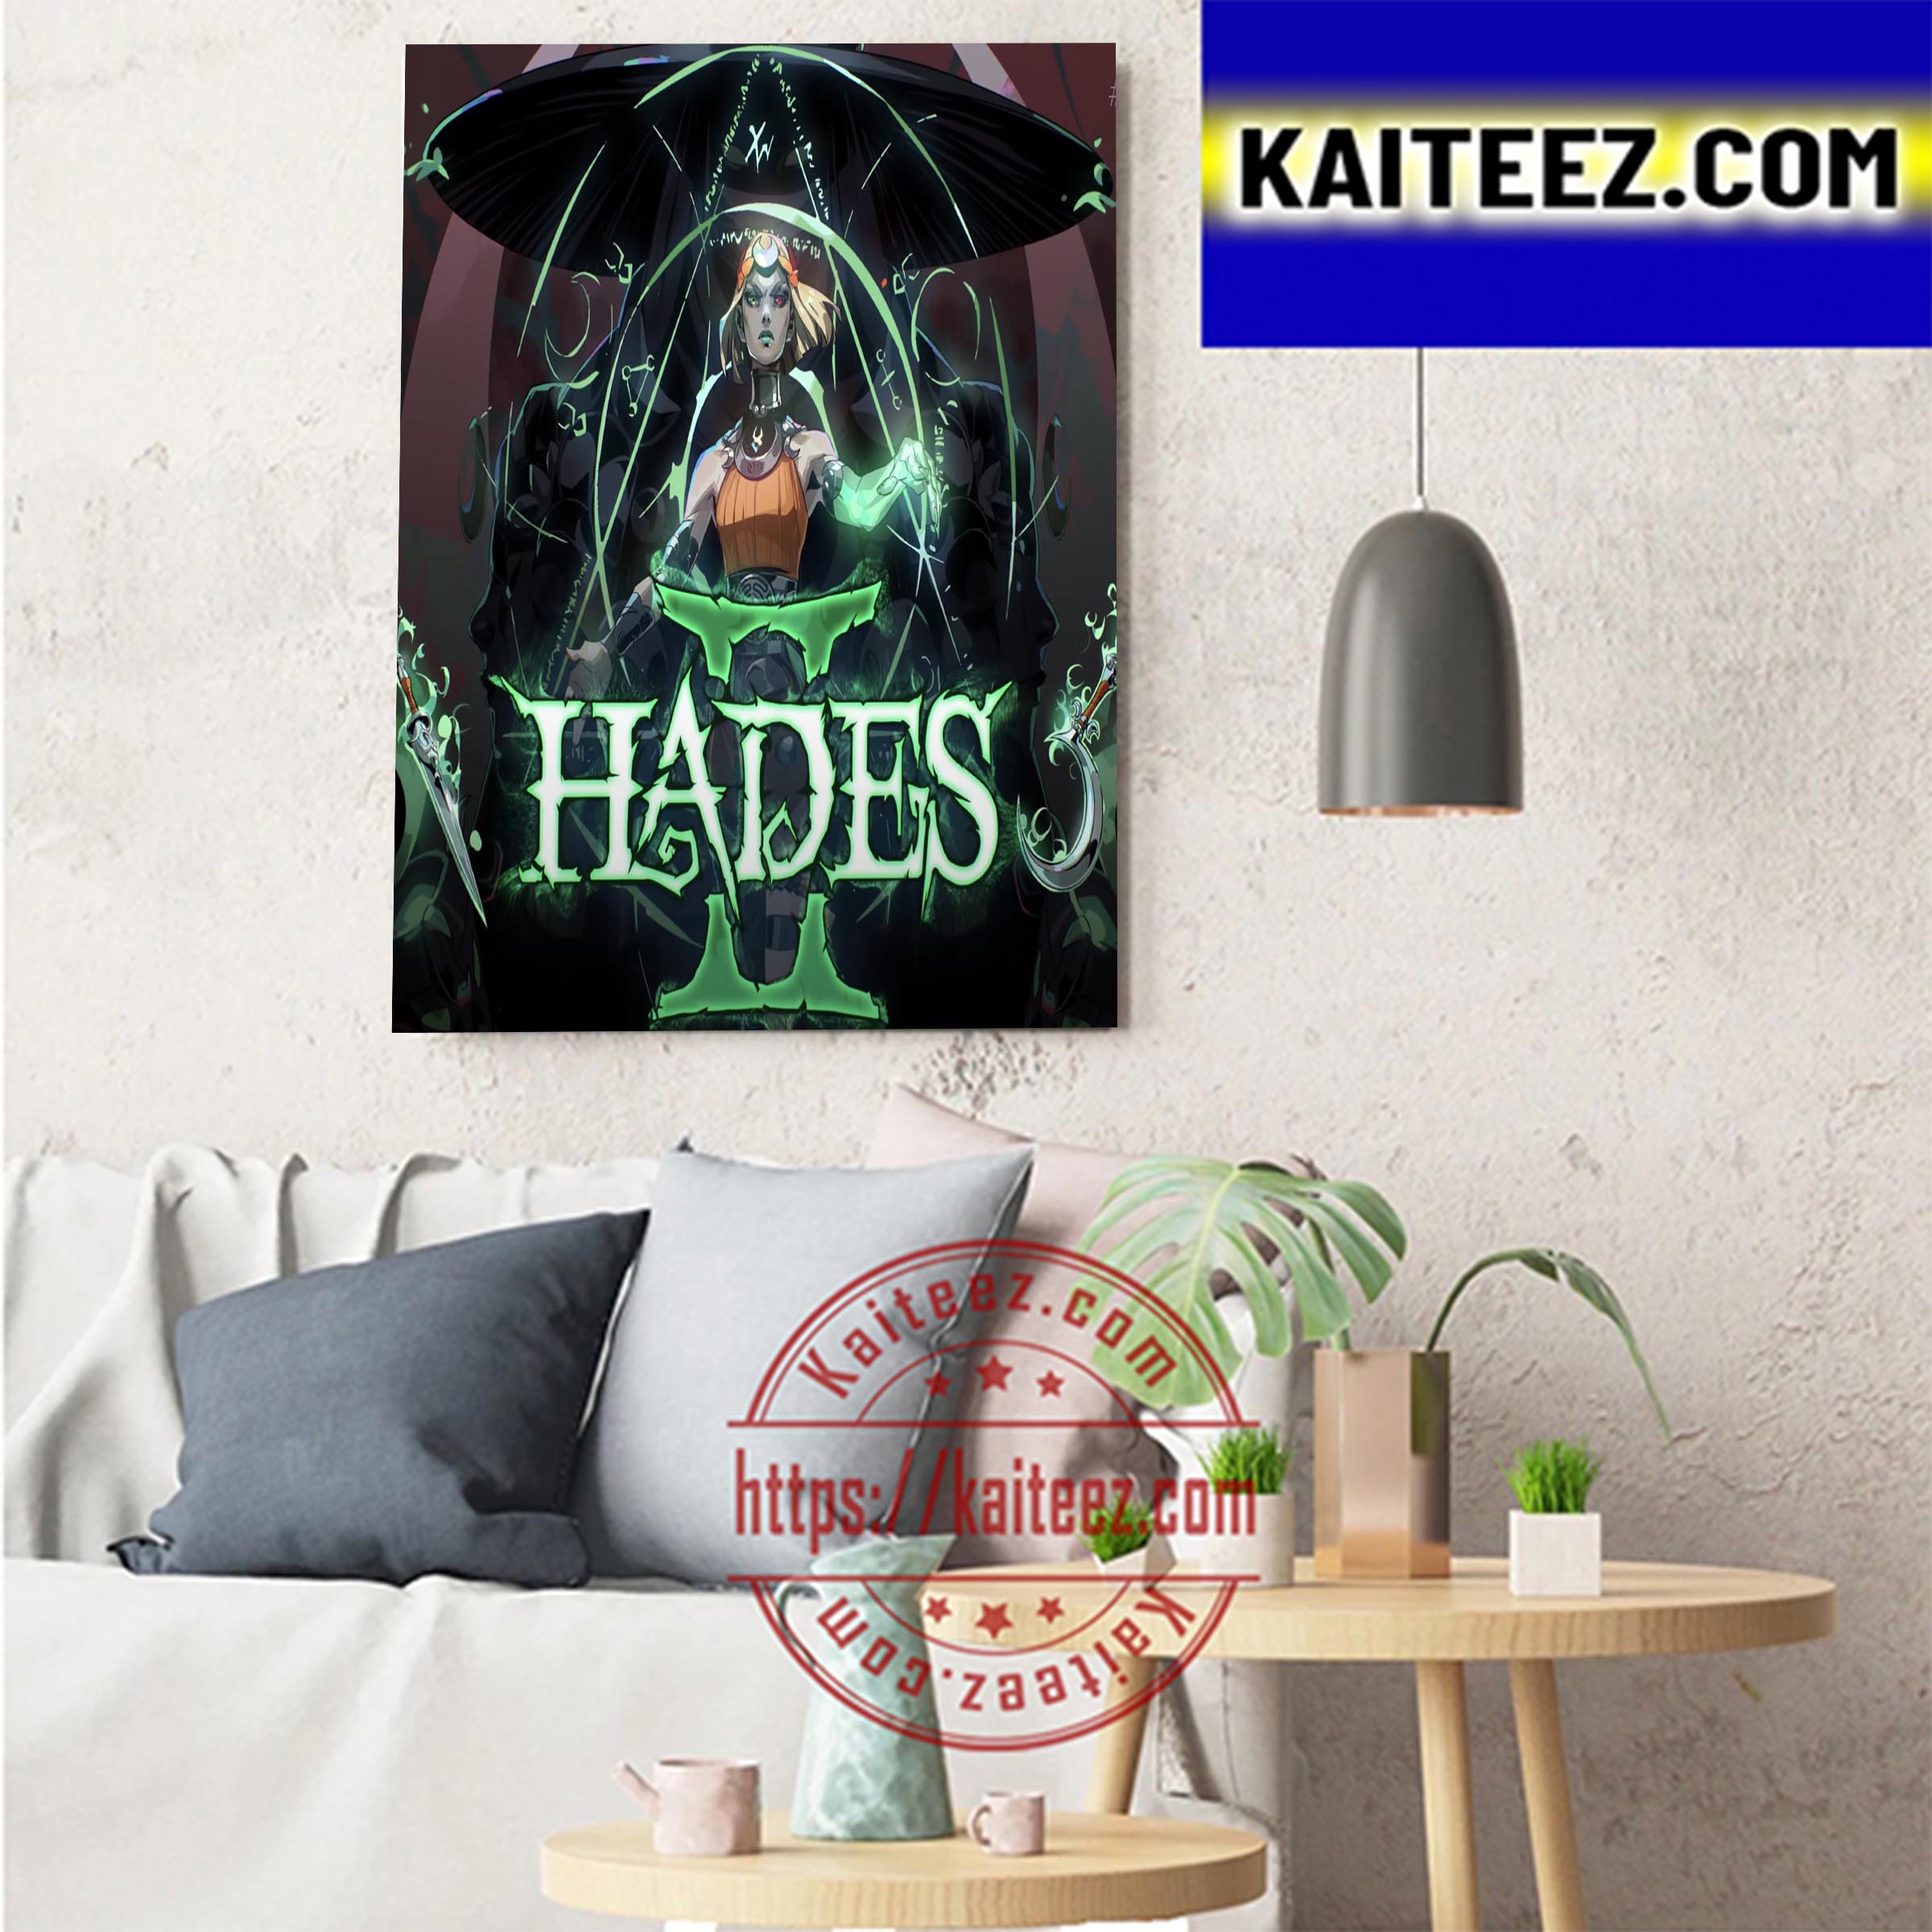 Hades II Revealed During The Game Awards